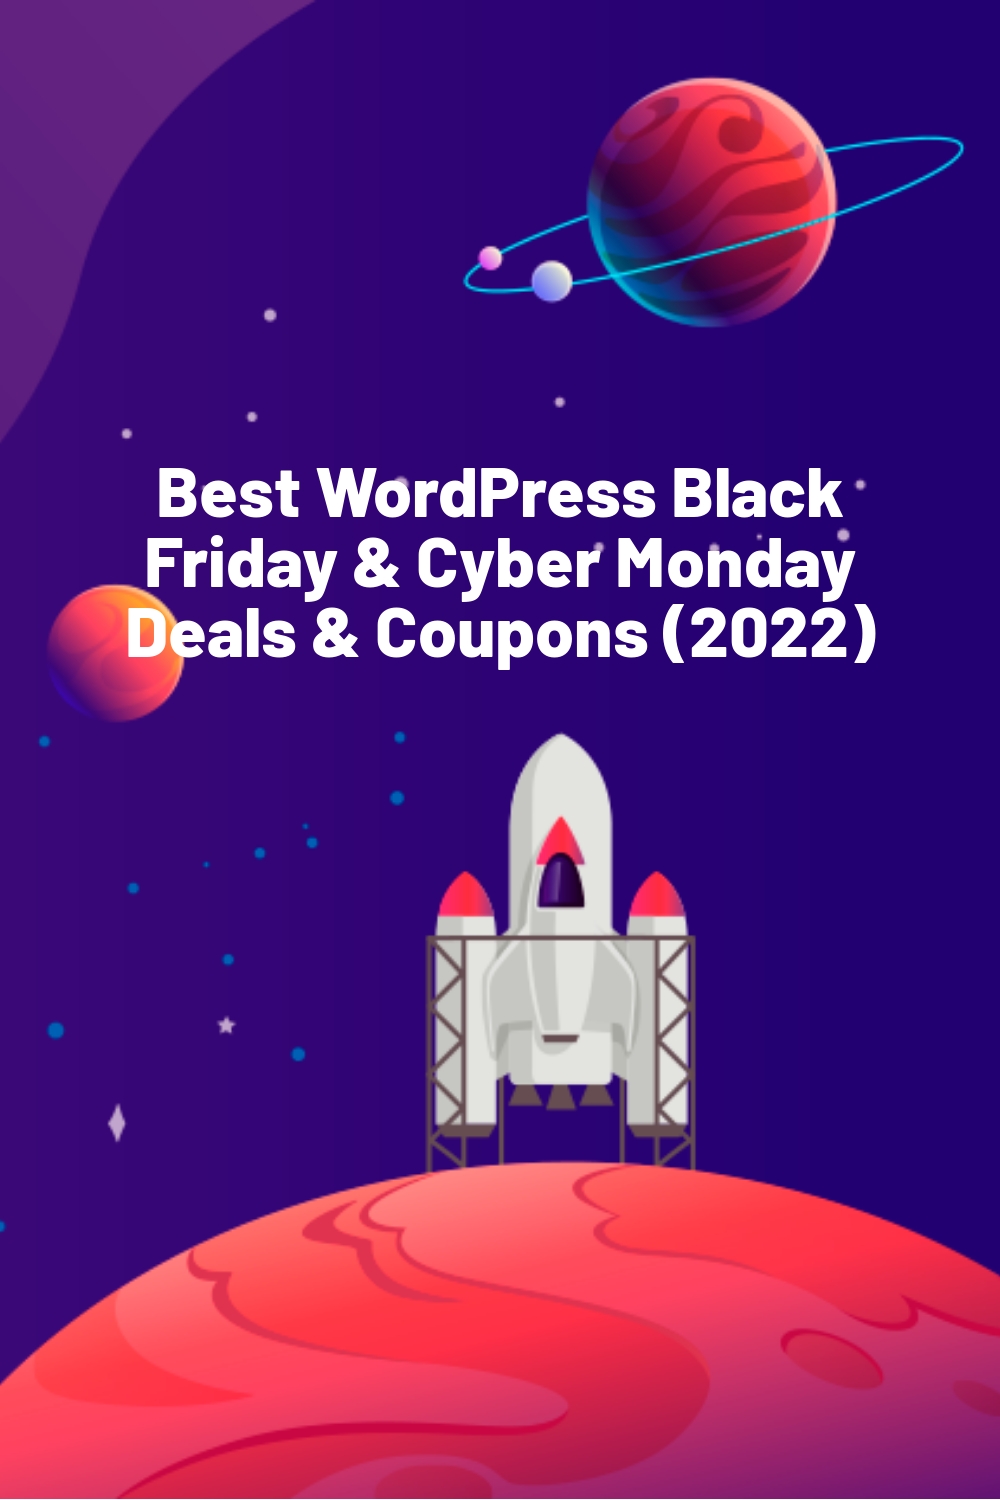 Best WordPress Black Friday & Cyber Monday Deals & Coupons (2022)